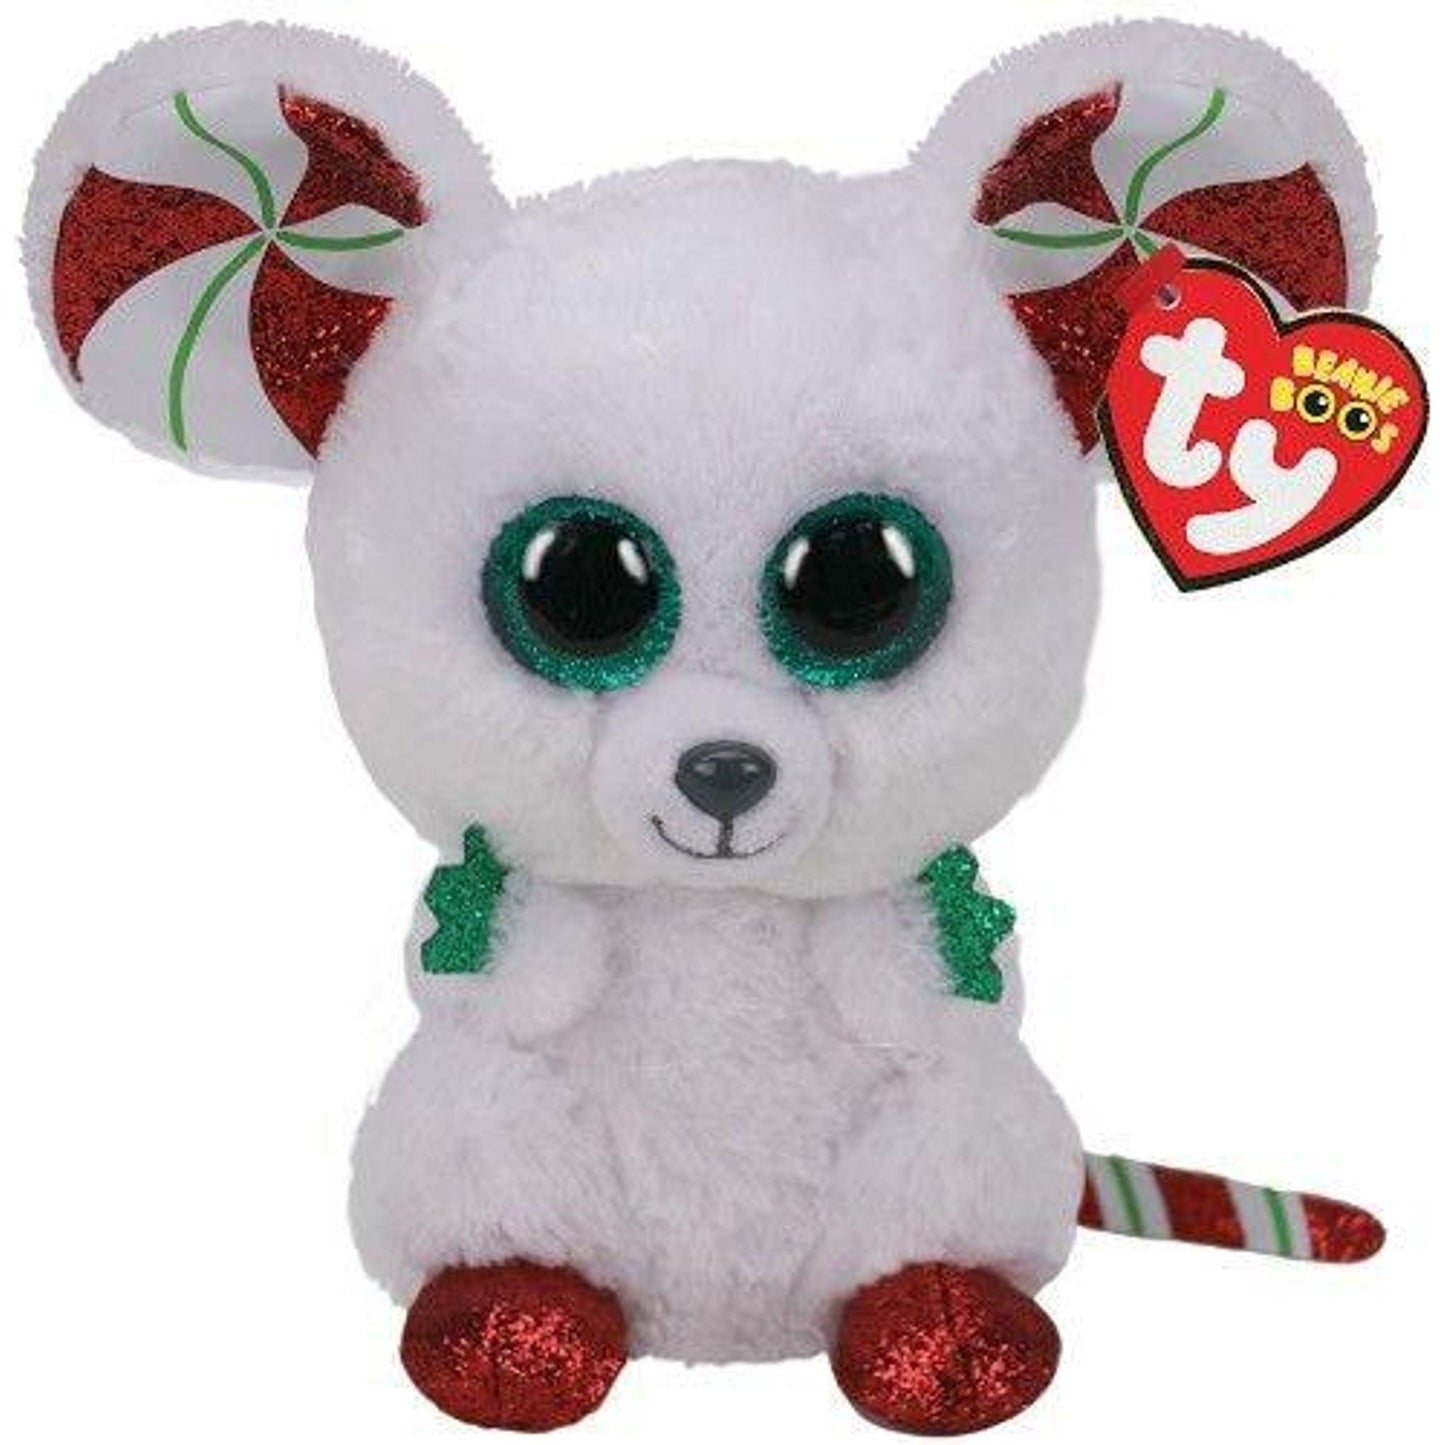 Chimney the Christmas Mouse - Toybox Tales